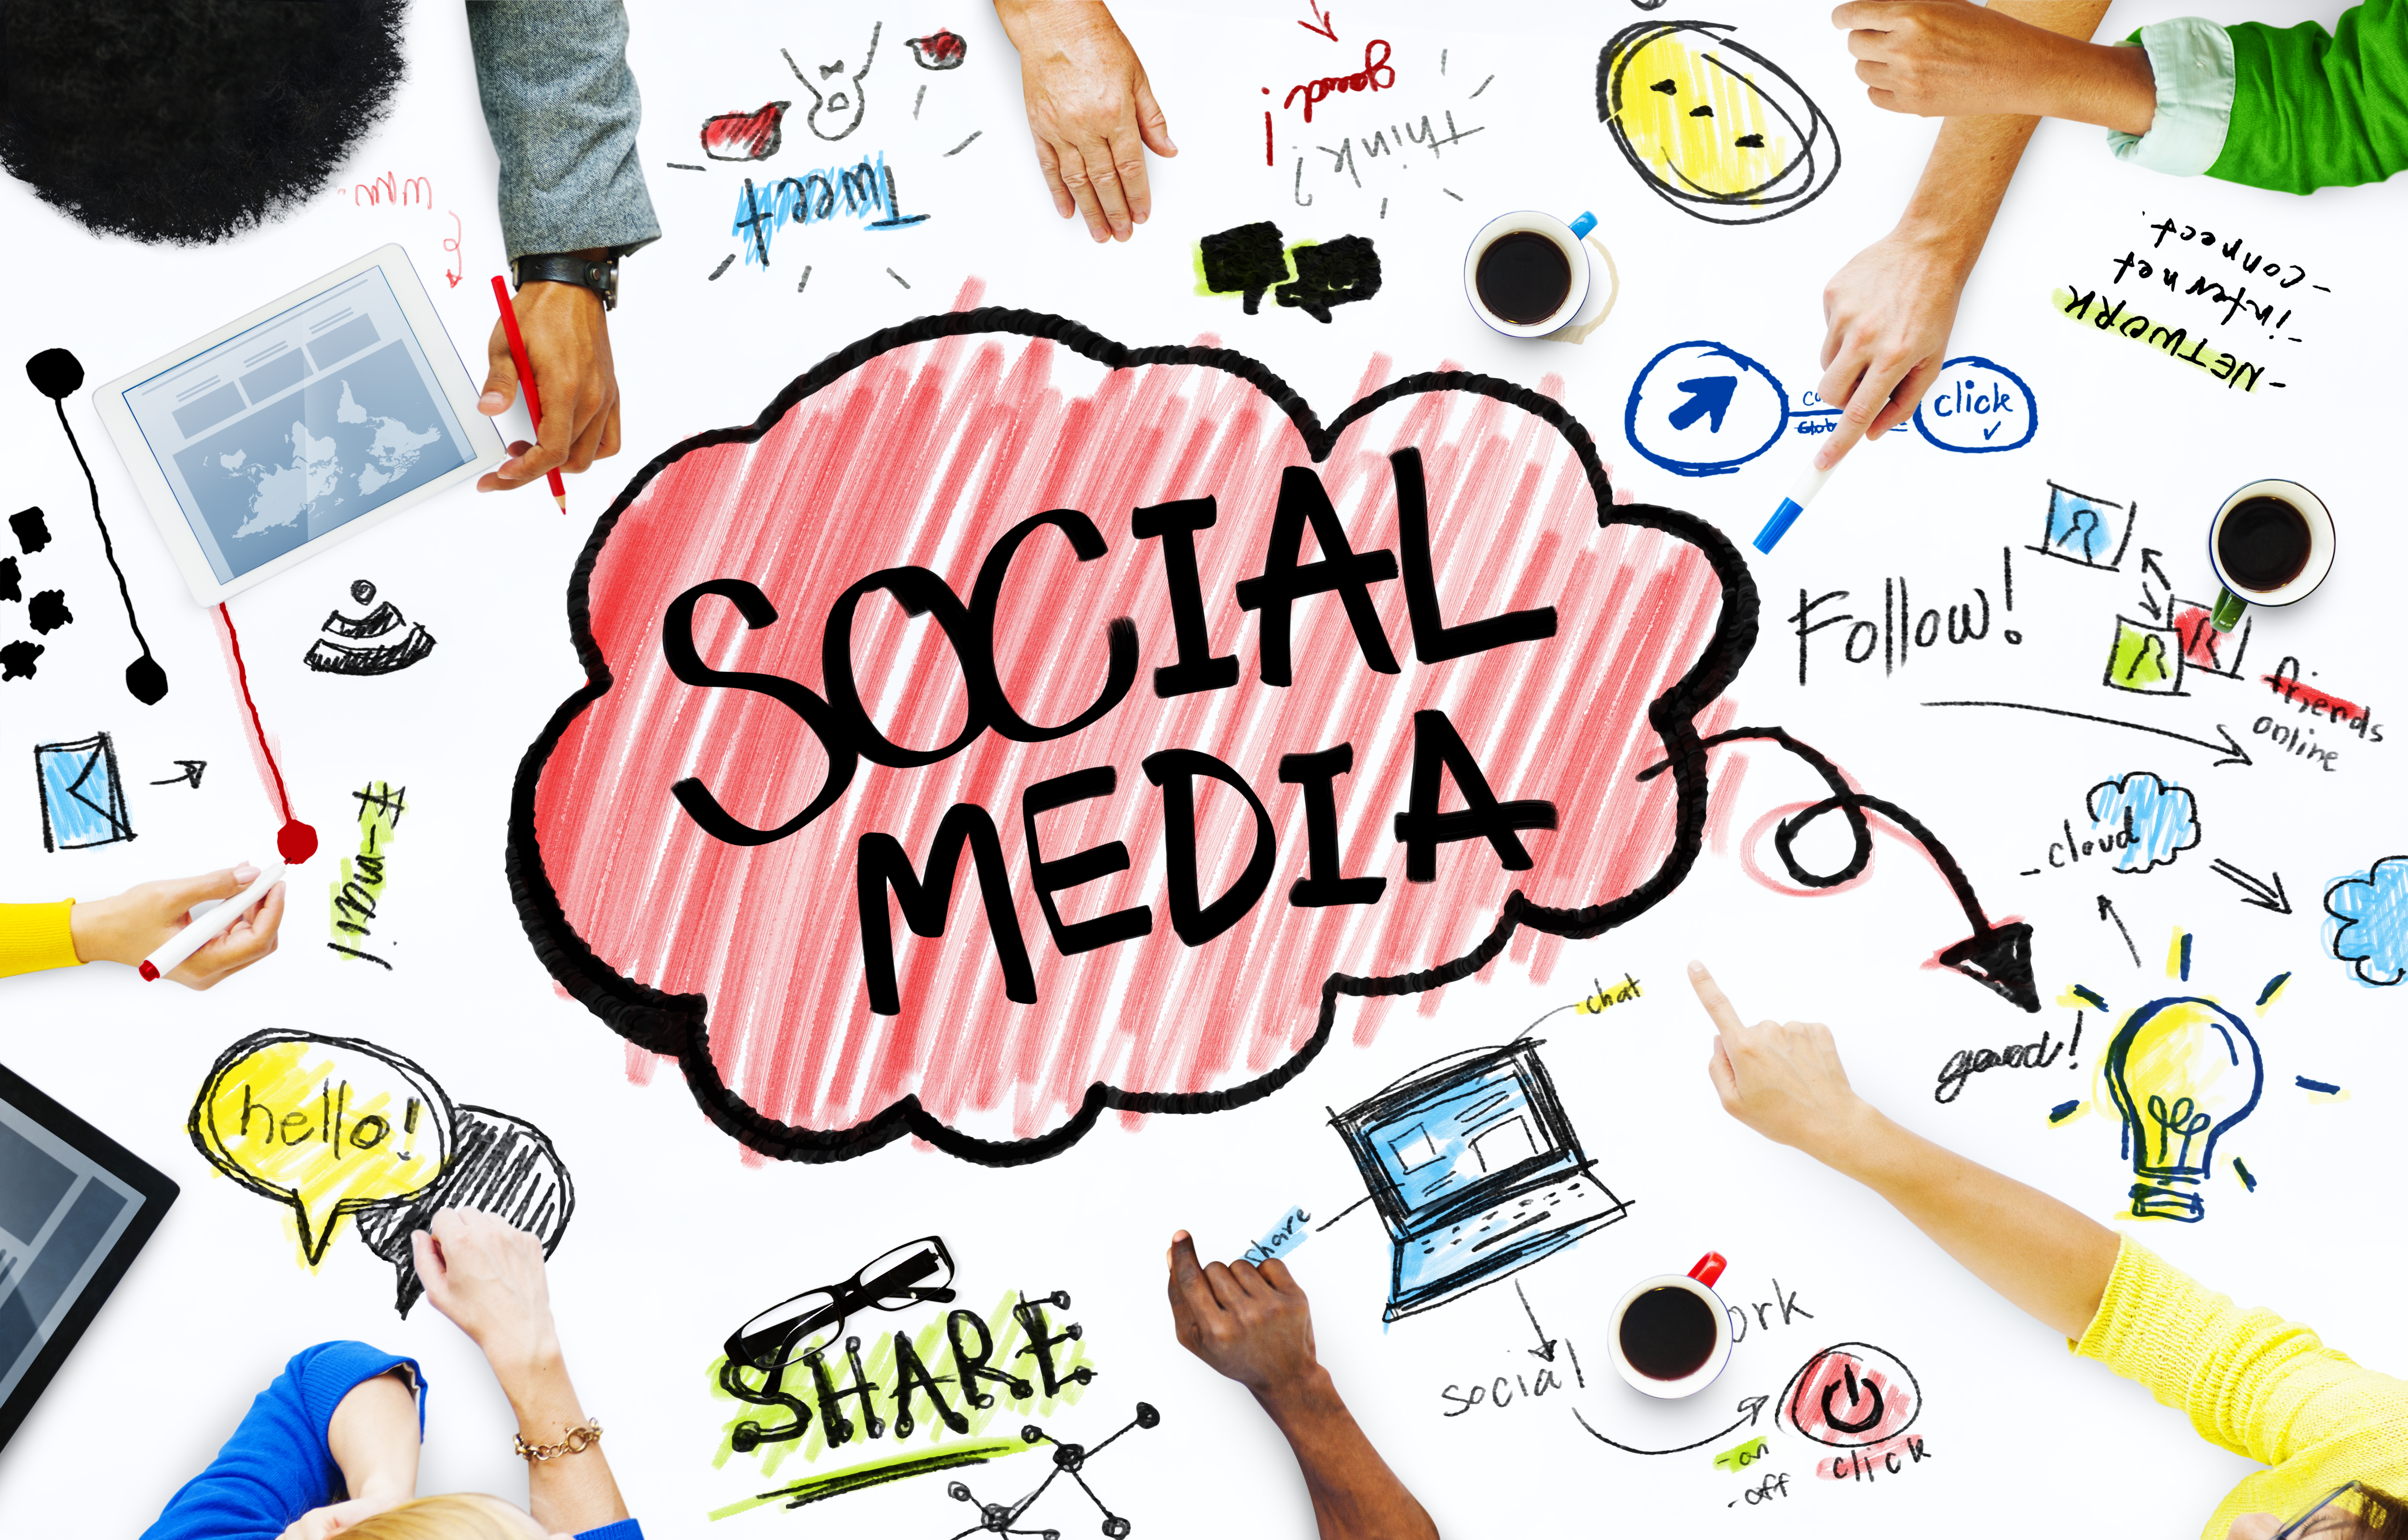 Why choose social media marketing for your business?